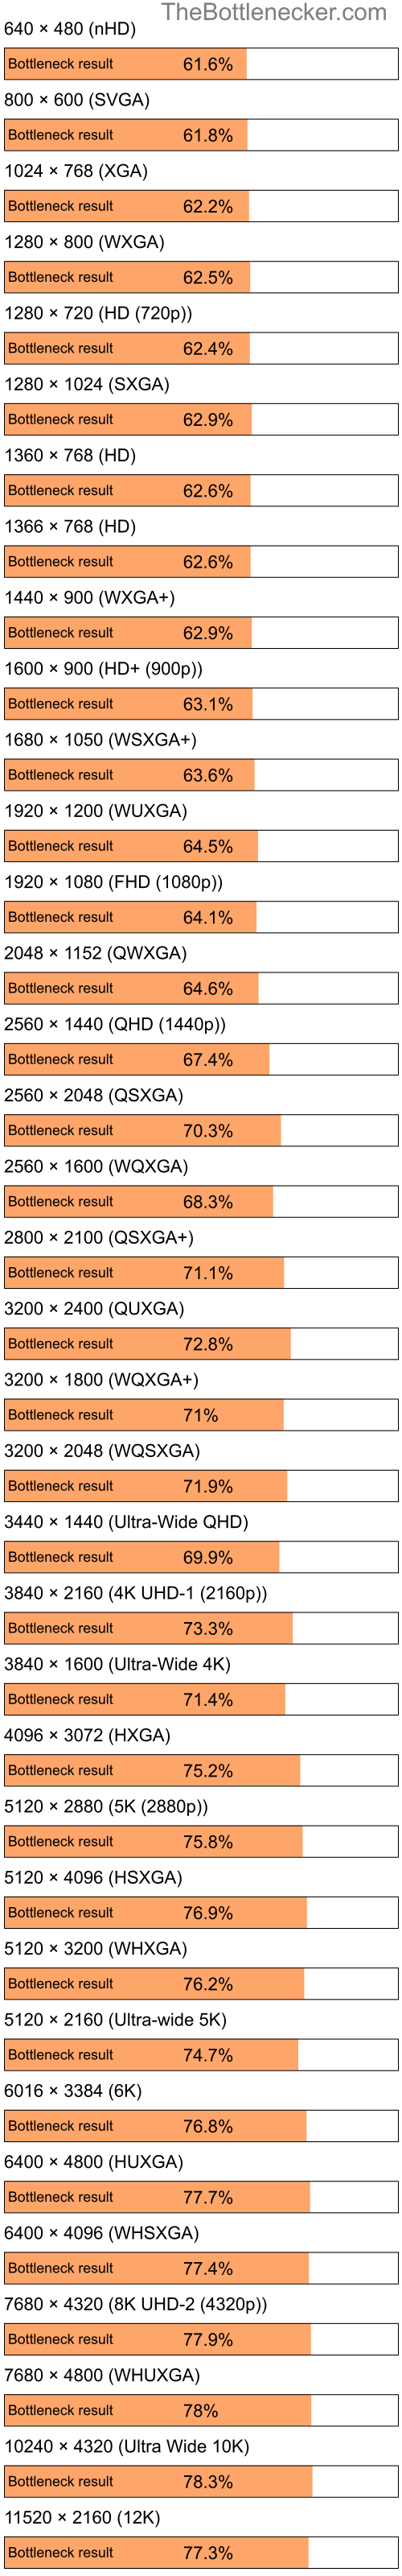 Bottleneck results by resolution for Intel Pentium 4 and AMD Radeon HD 6290 in General Tasks